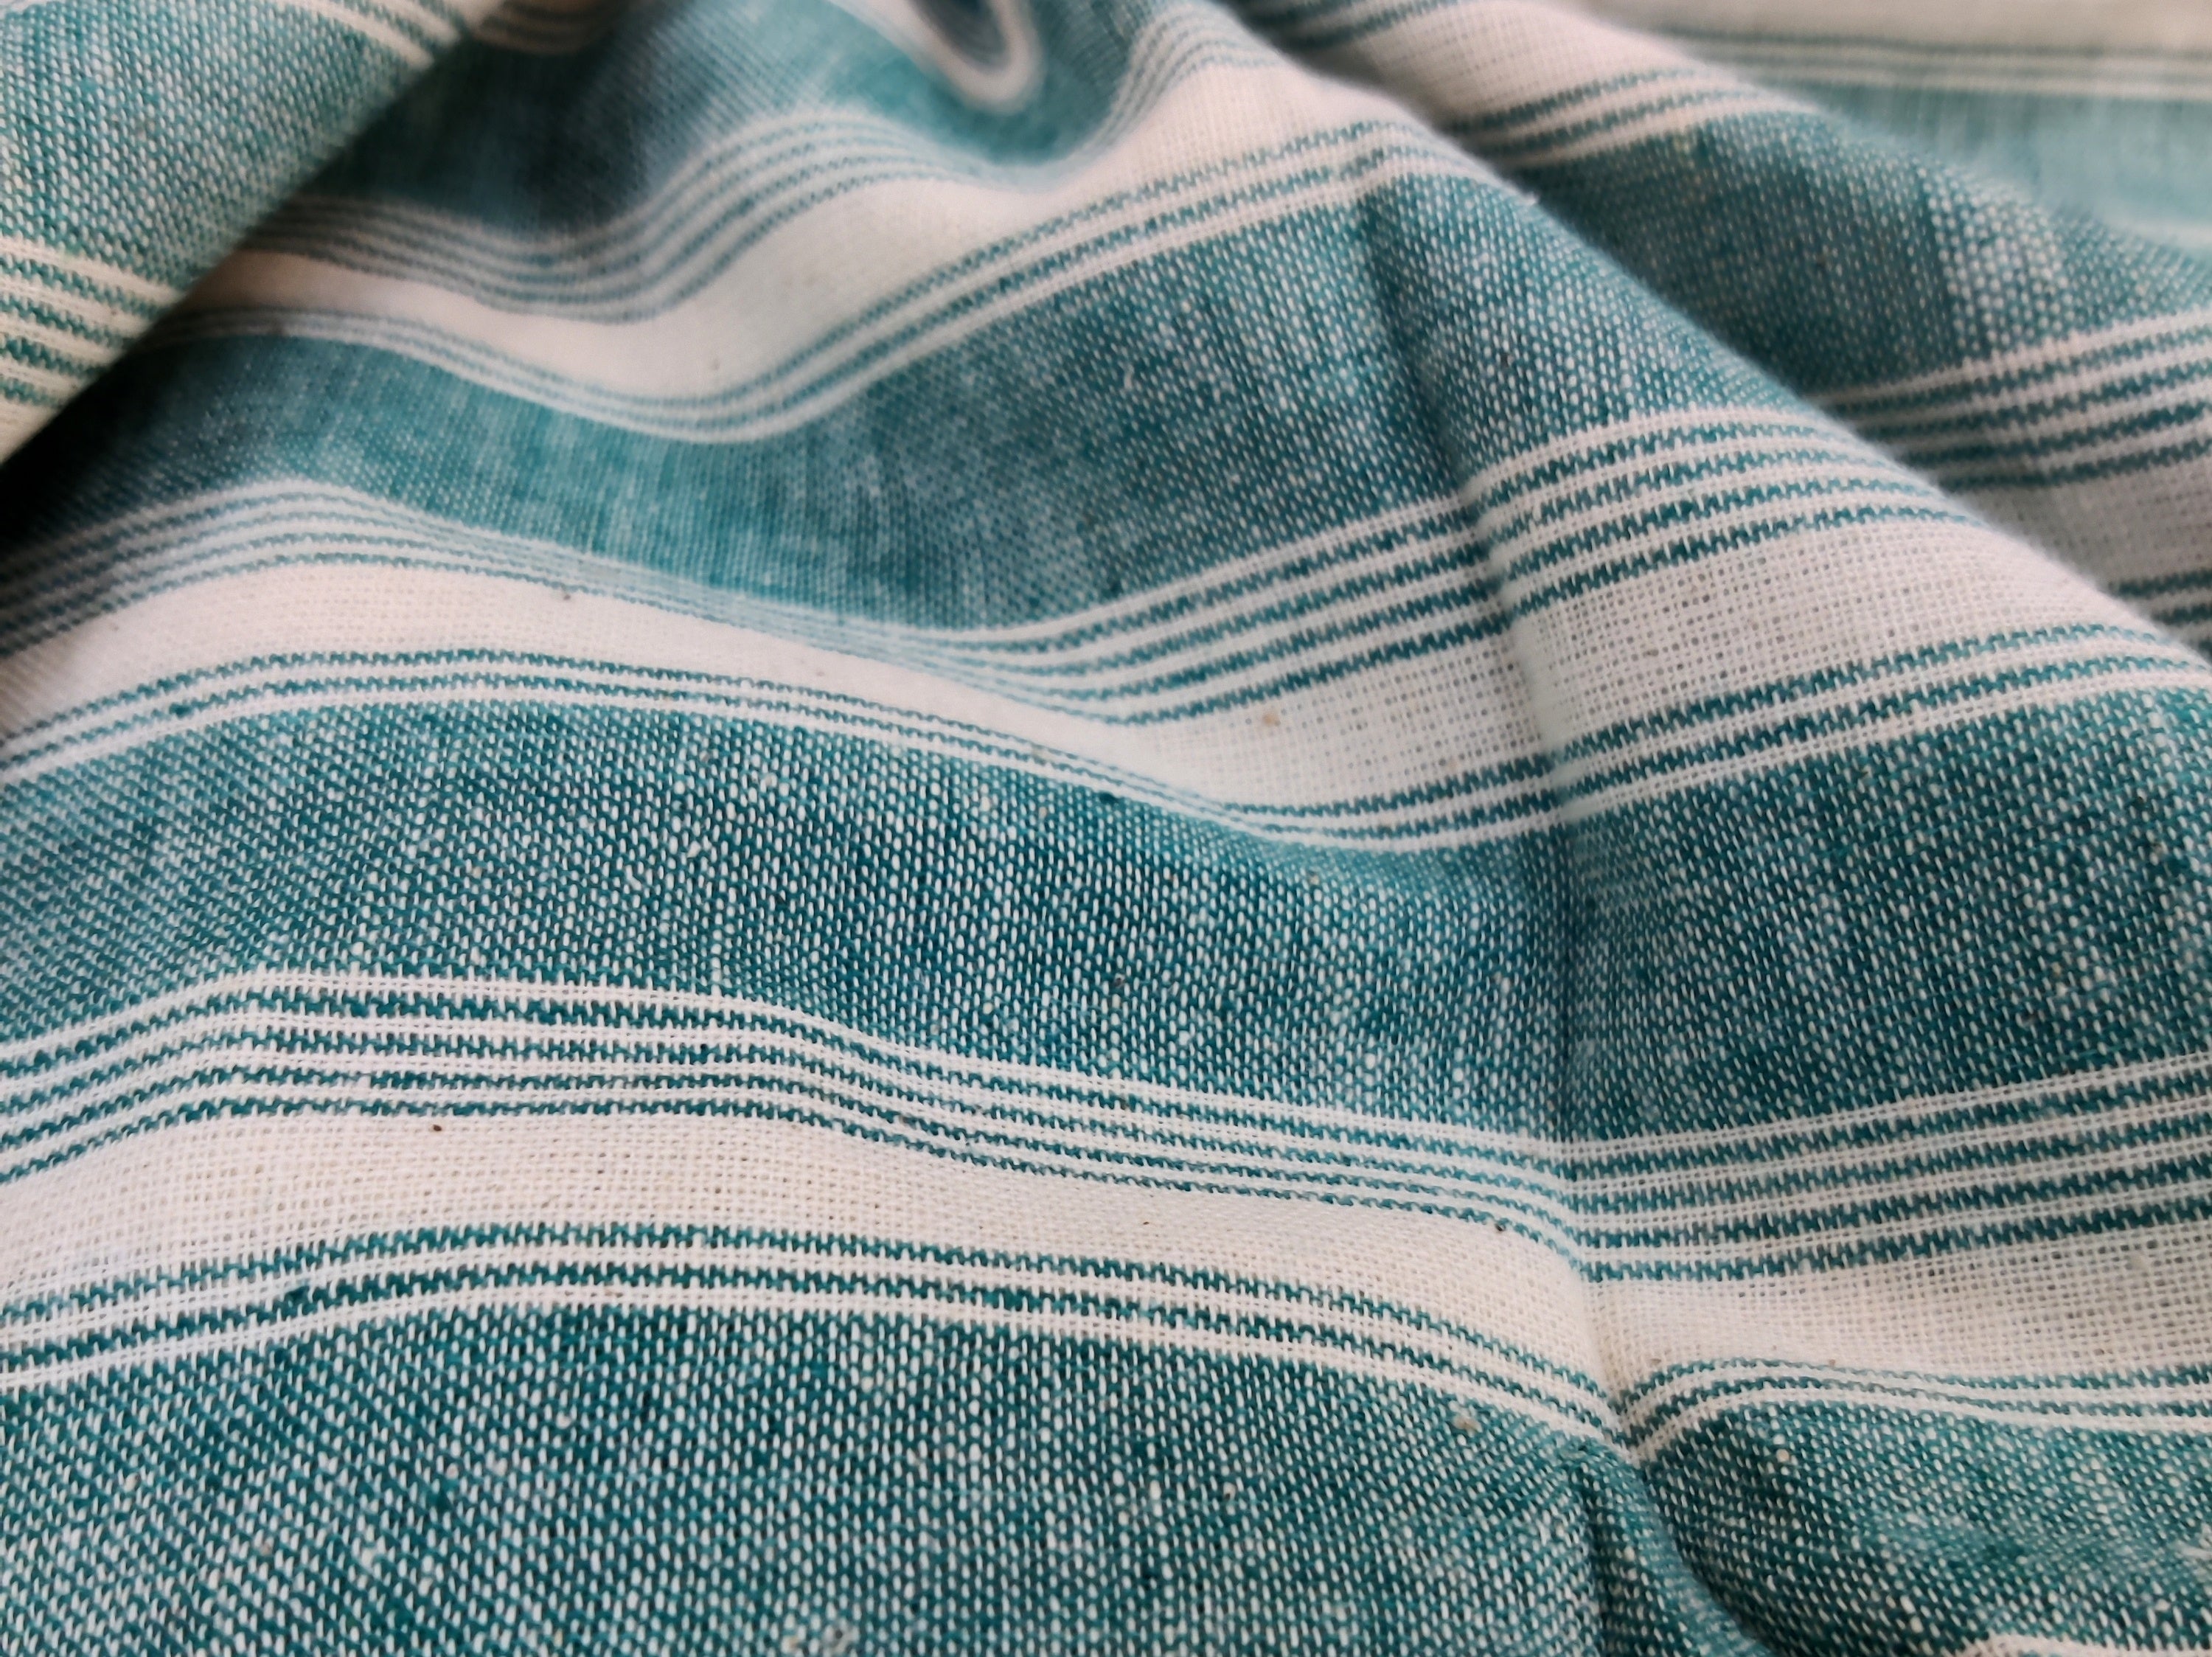 Off White with Turquoise Stripes Kotpad Handloom Fabric - IndianVillèz